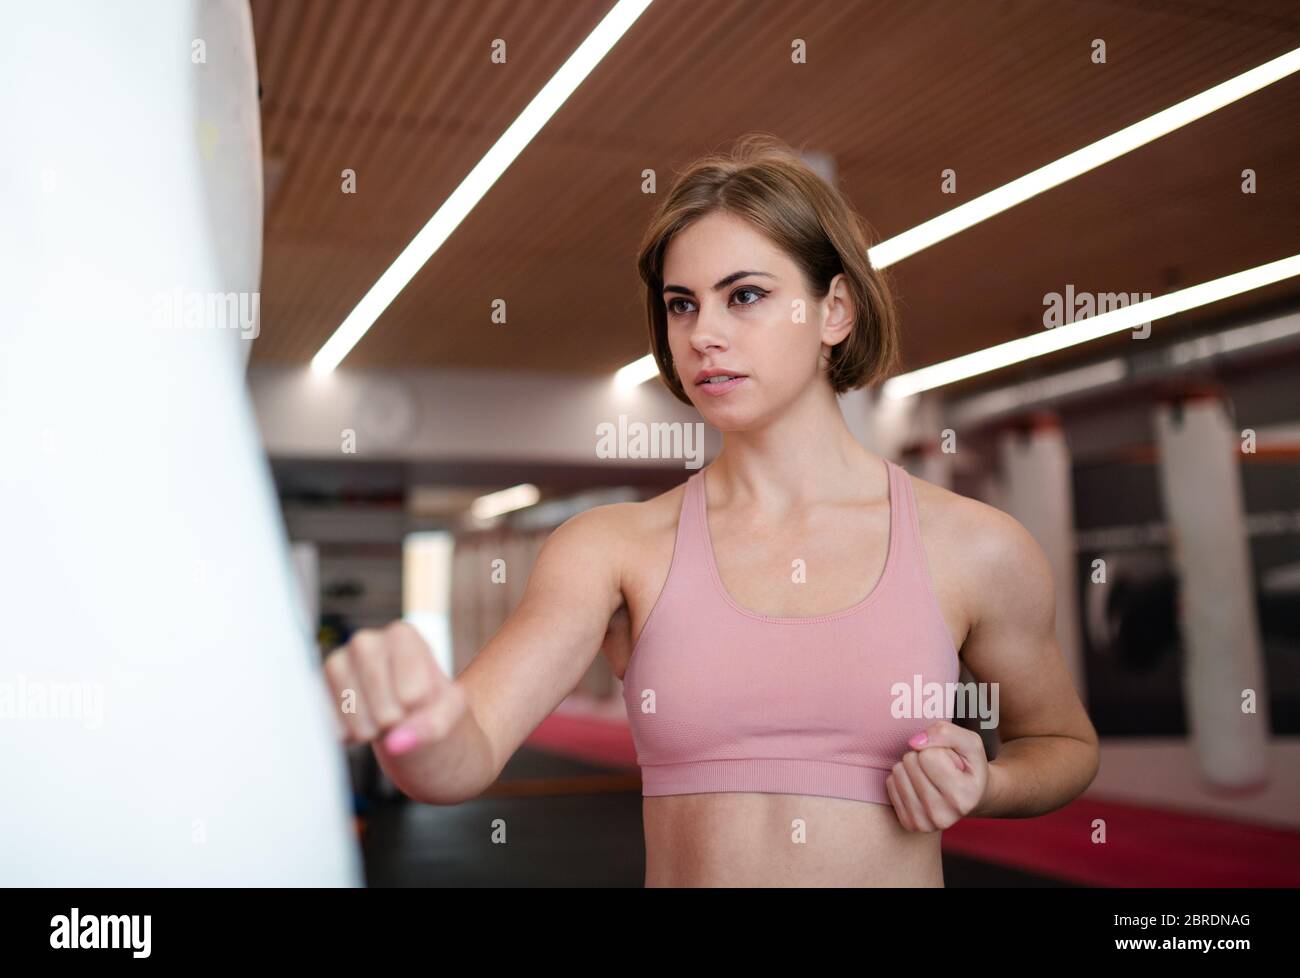 A young woman practising karate indoors in gym. Copy space. Stock Photo